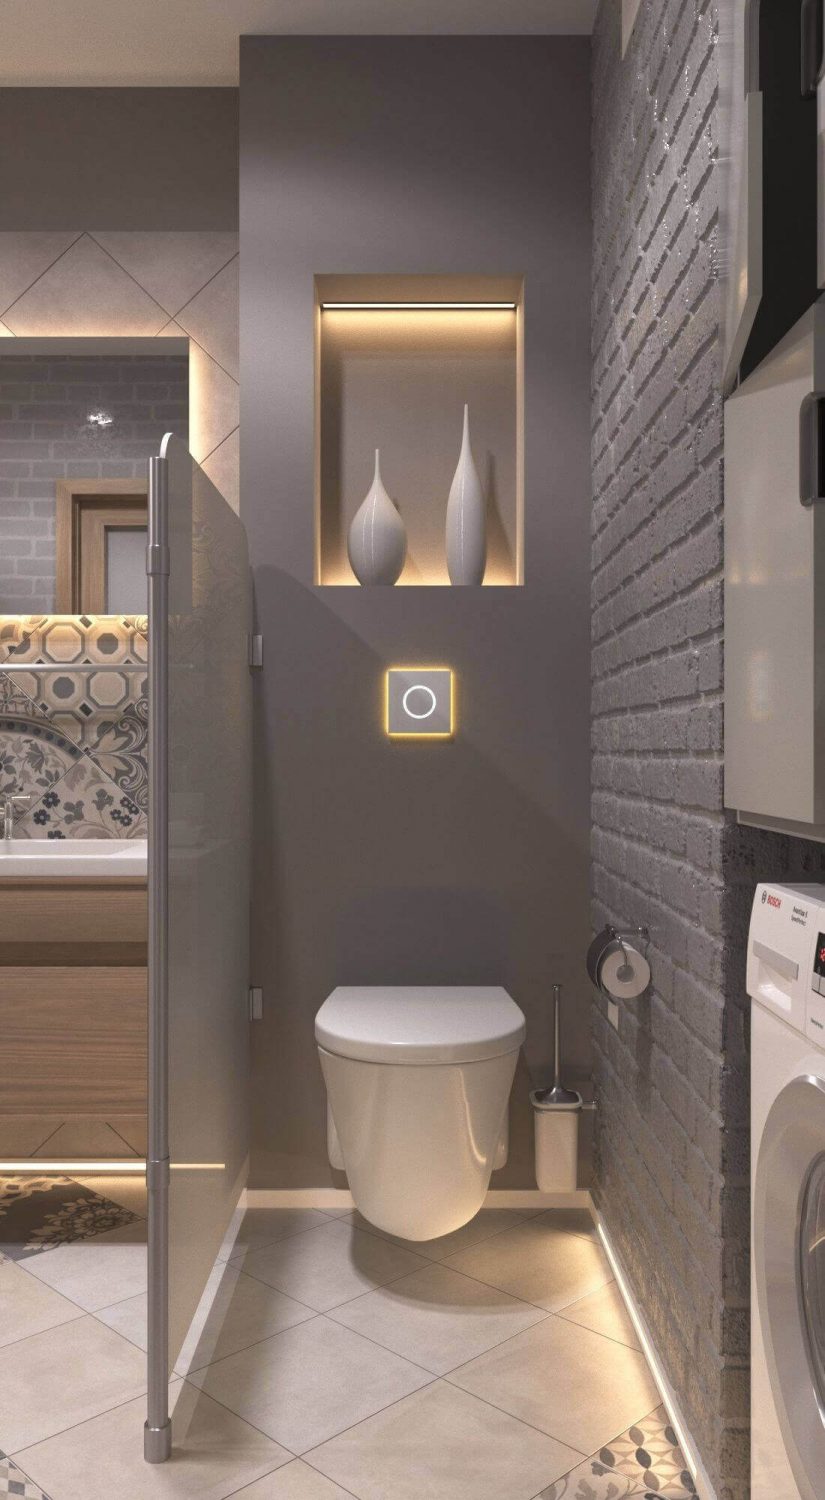 Bathroom Lighting Ideas LED Indirect Lighting In-Wall Niches - Harptimes.com